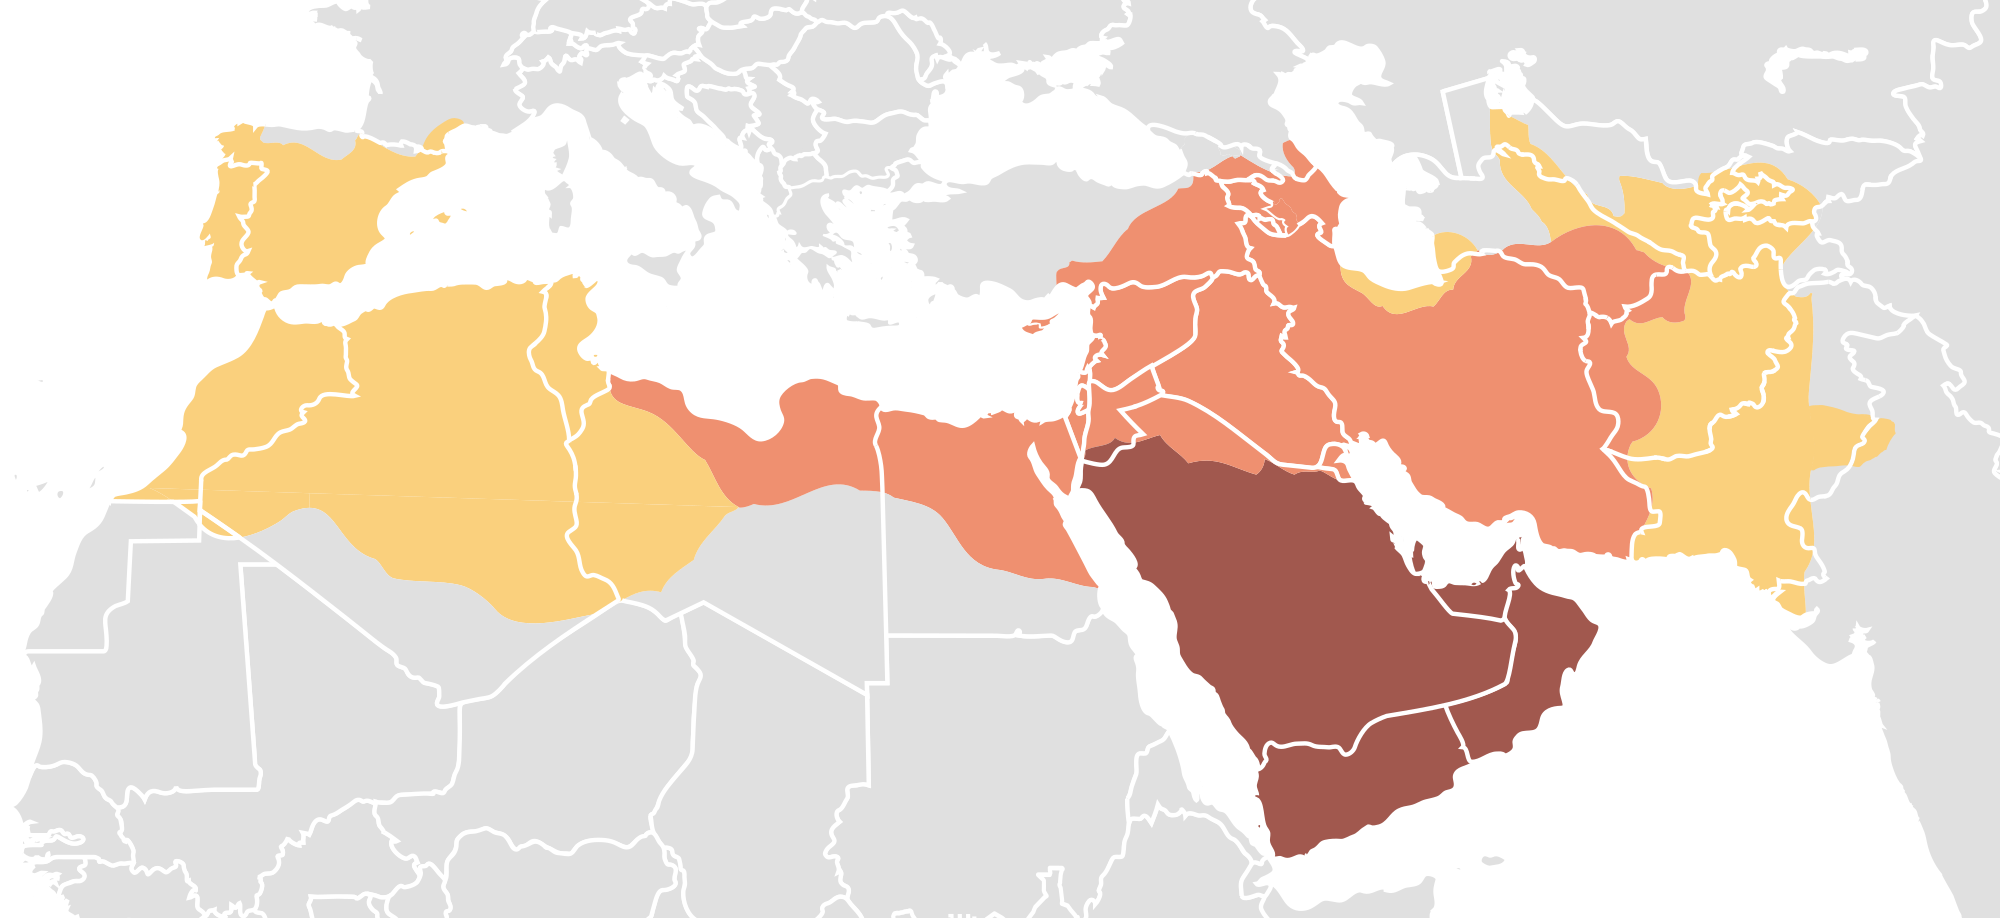 2000px-Map_of_expansion_of_Caliphate.svg.png